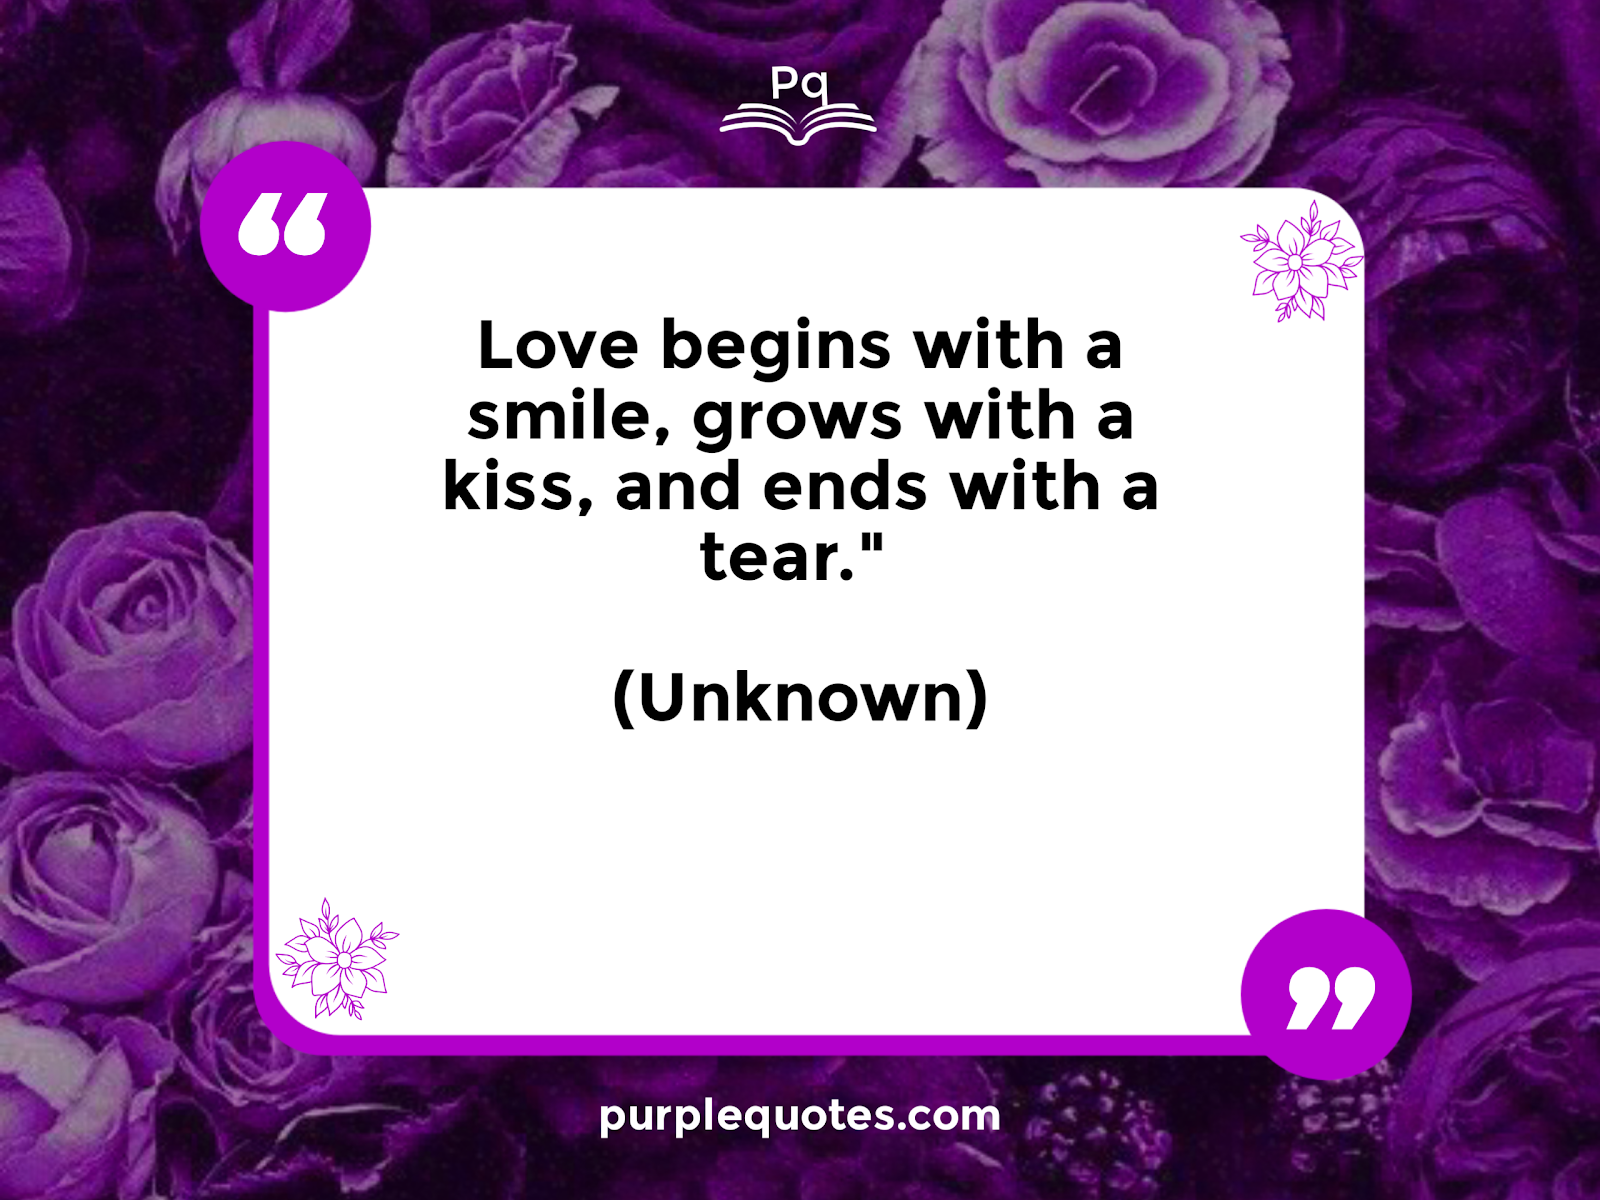 "Love begins with a smile, grows with a kiss, and ends with a tear." (Unknown)

